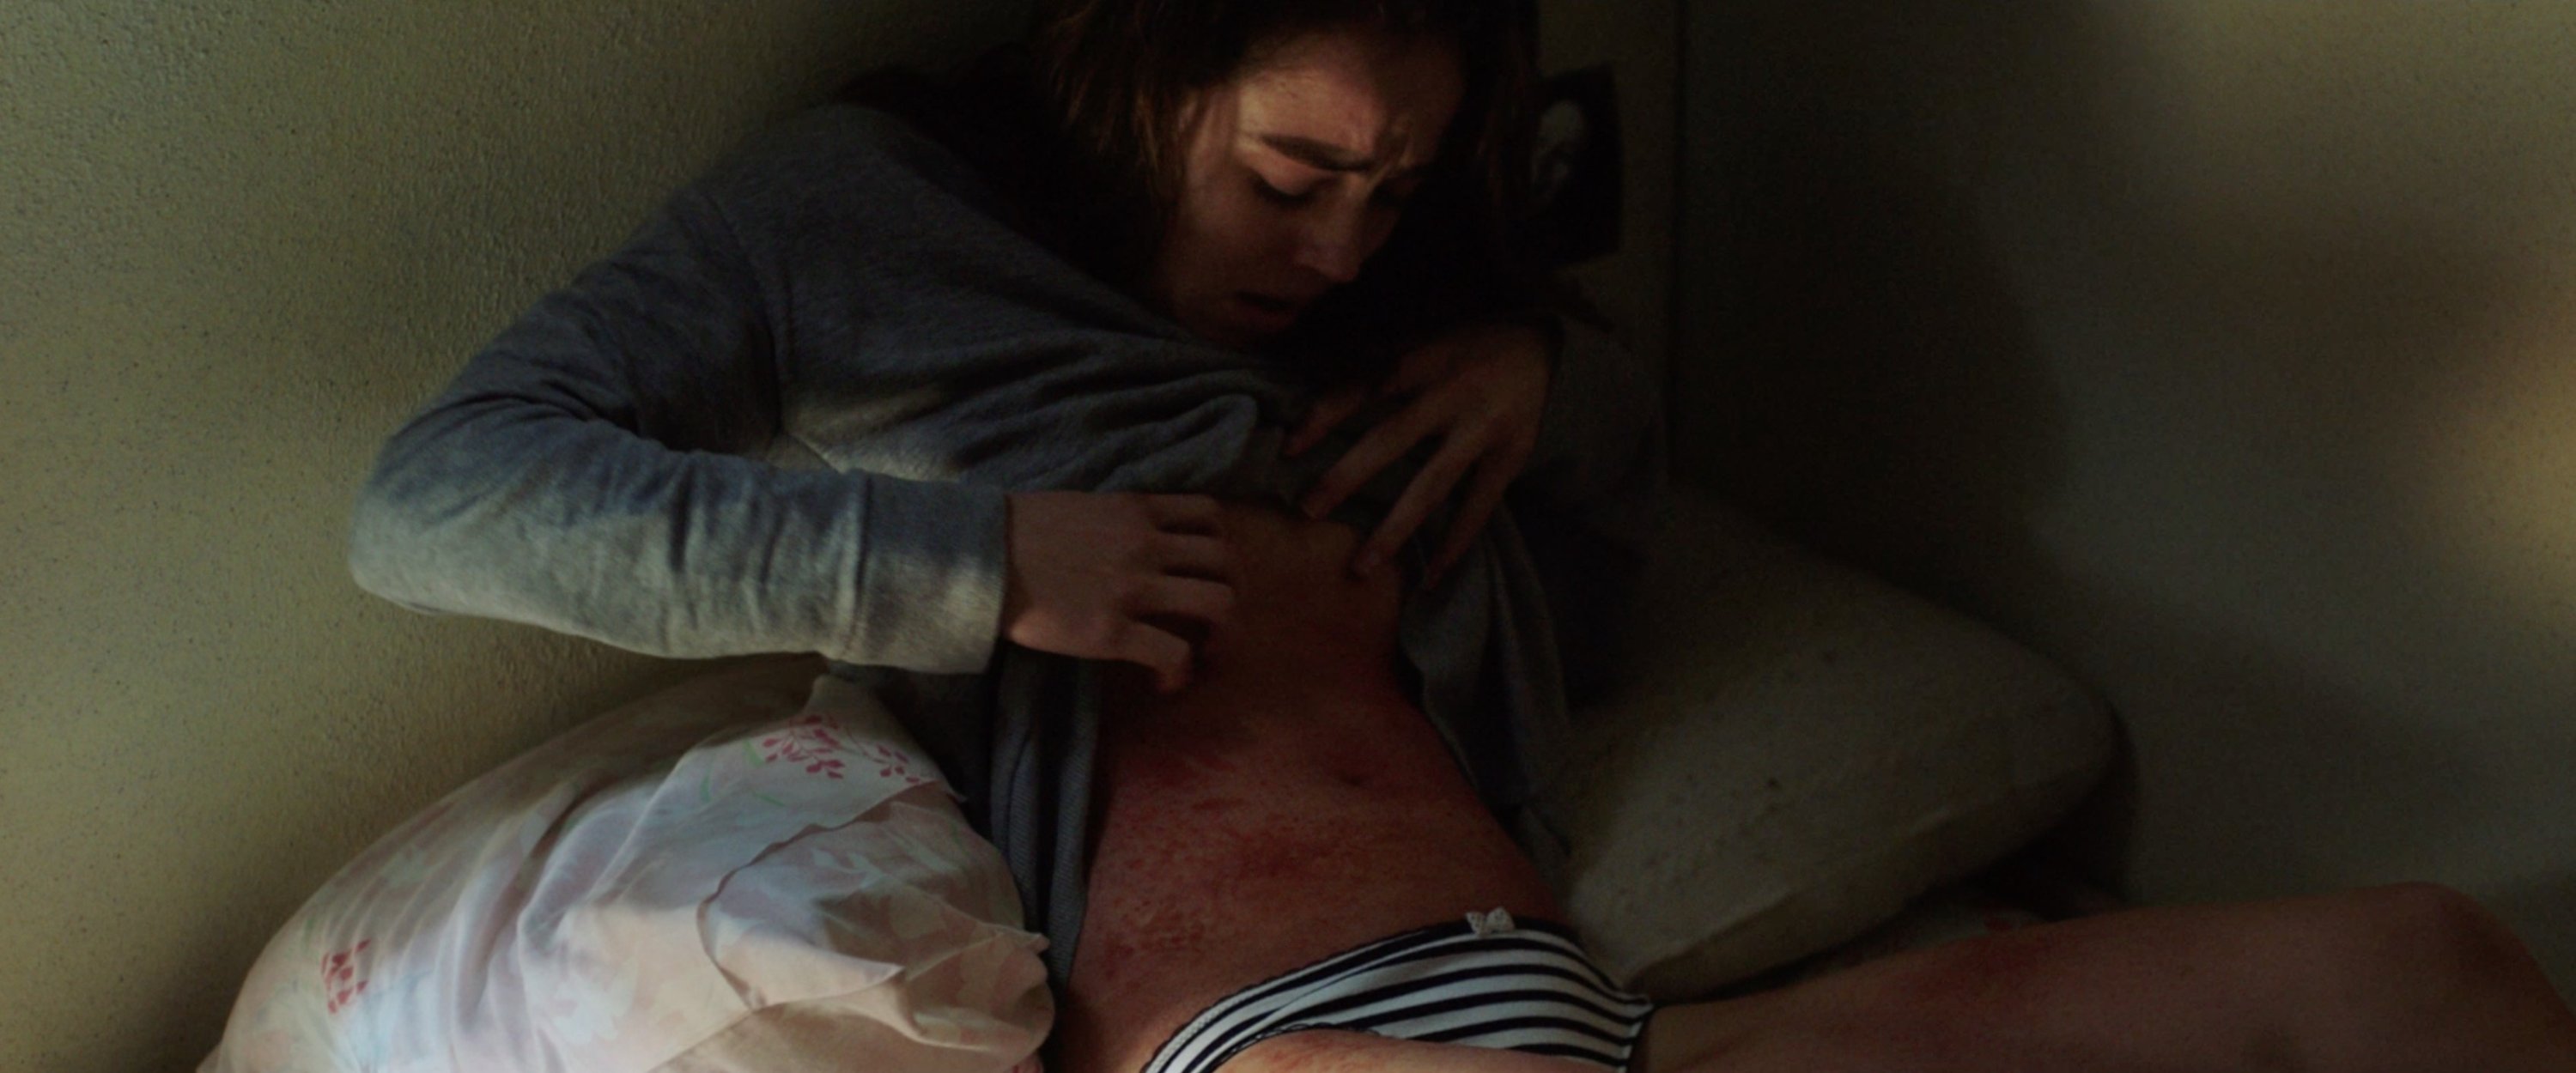 A still shot from "Raw" shows the terrible rash Justine develops after eating meat.